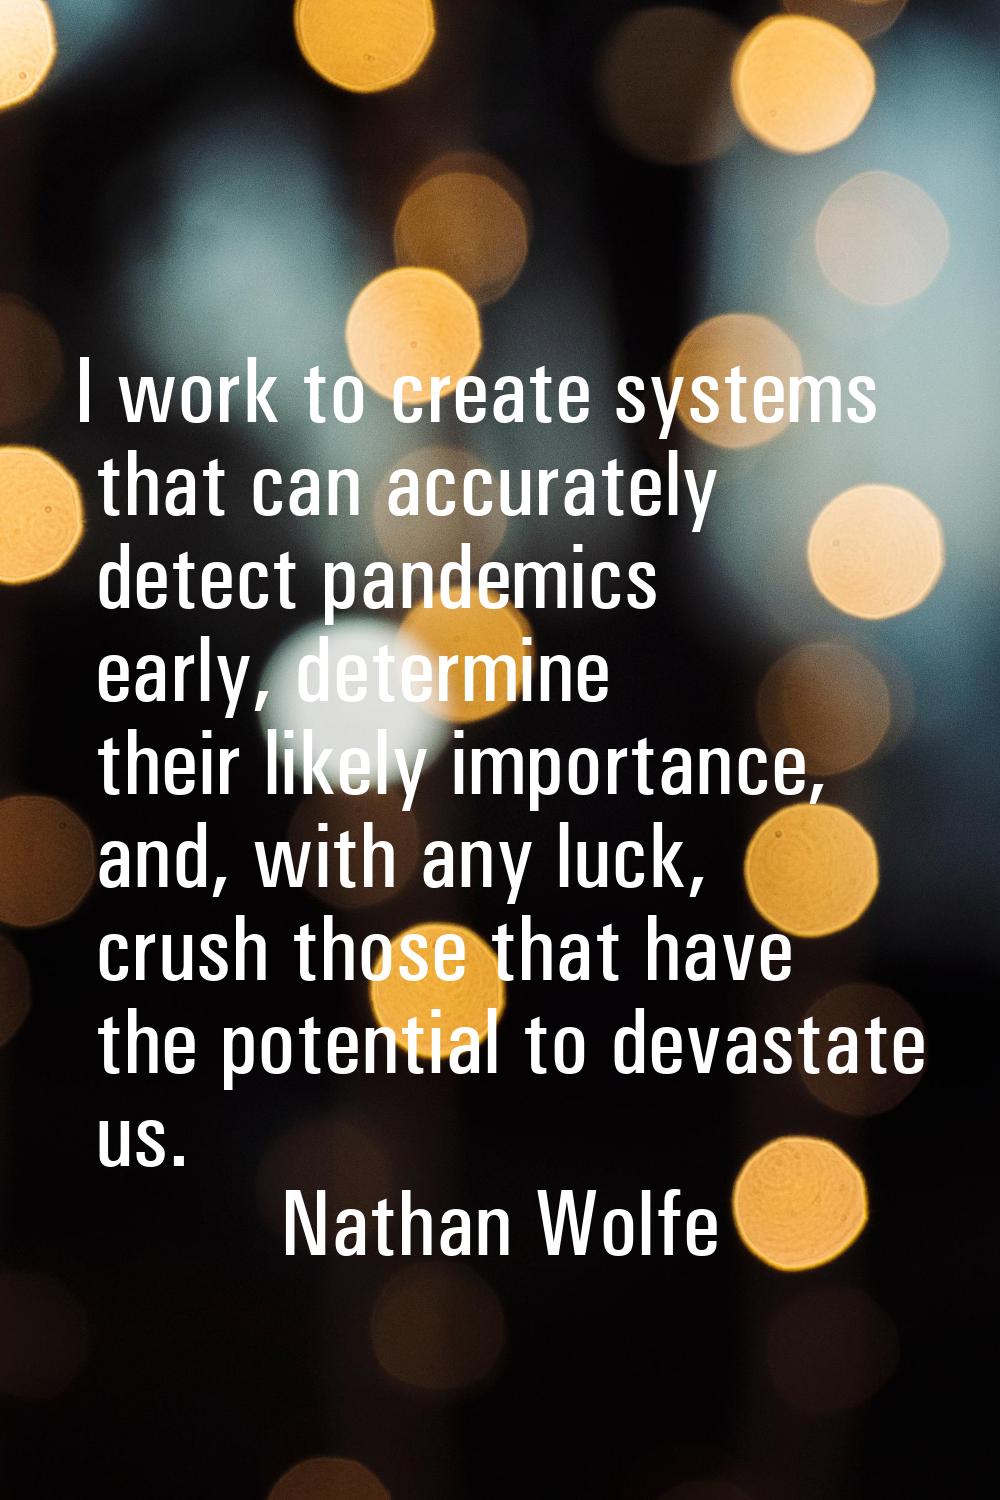 I work to create systems that can accurately detect pandemics early, determine their likely importa